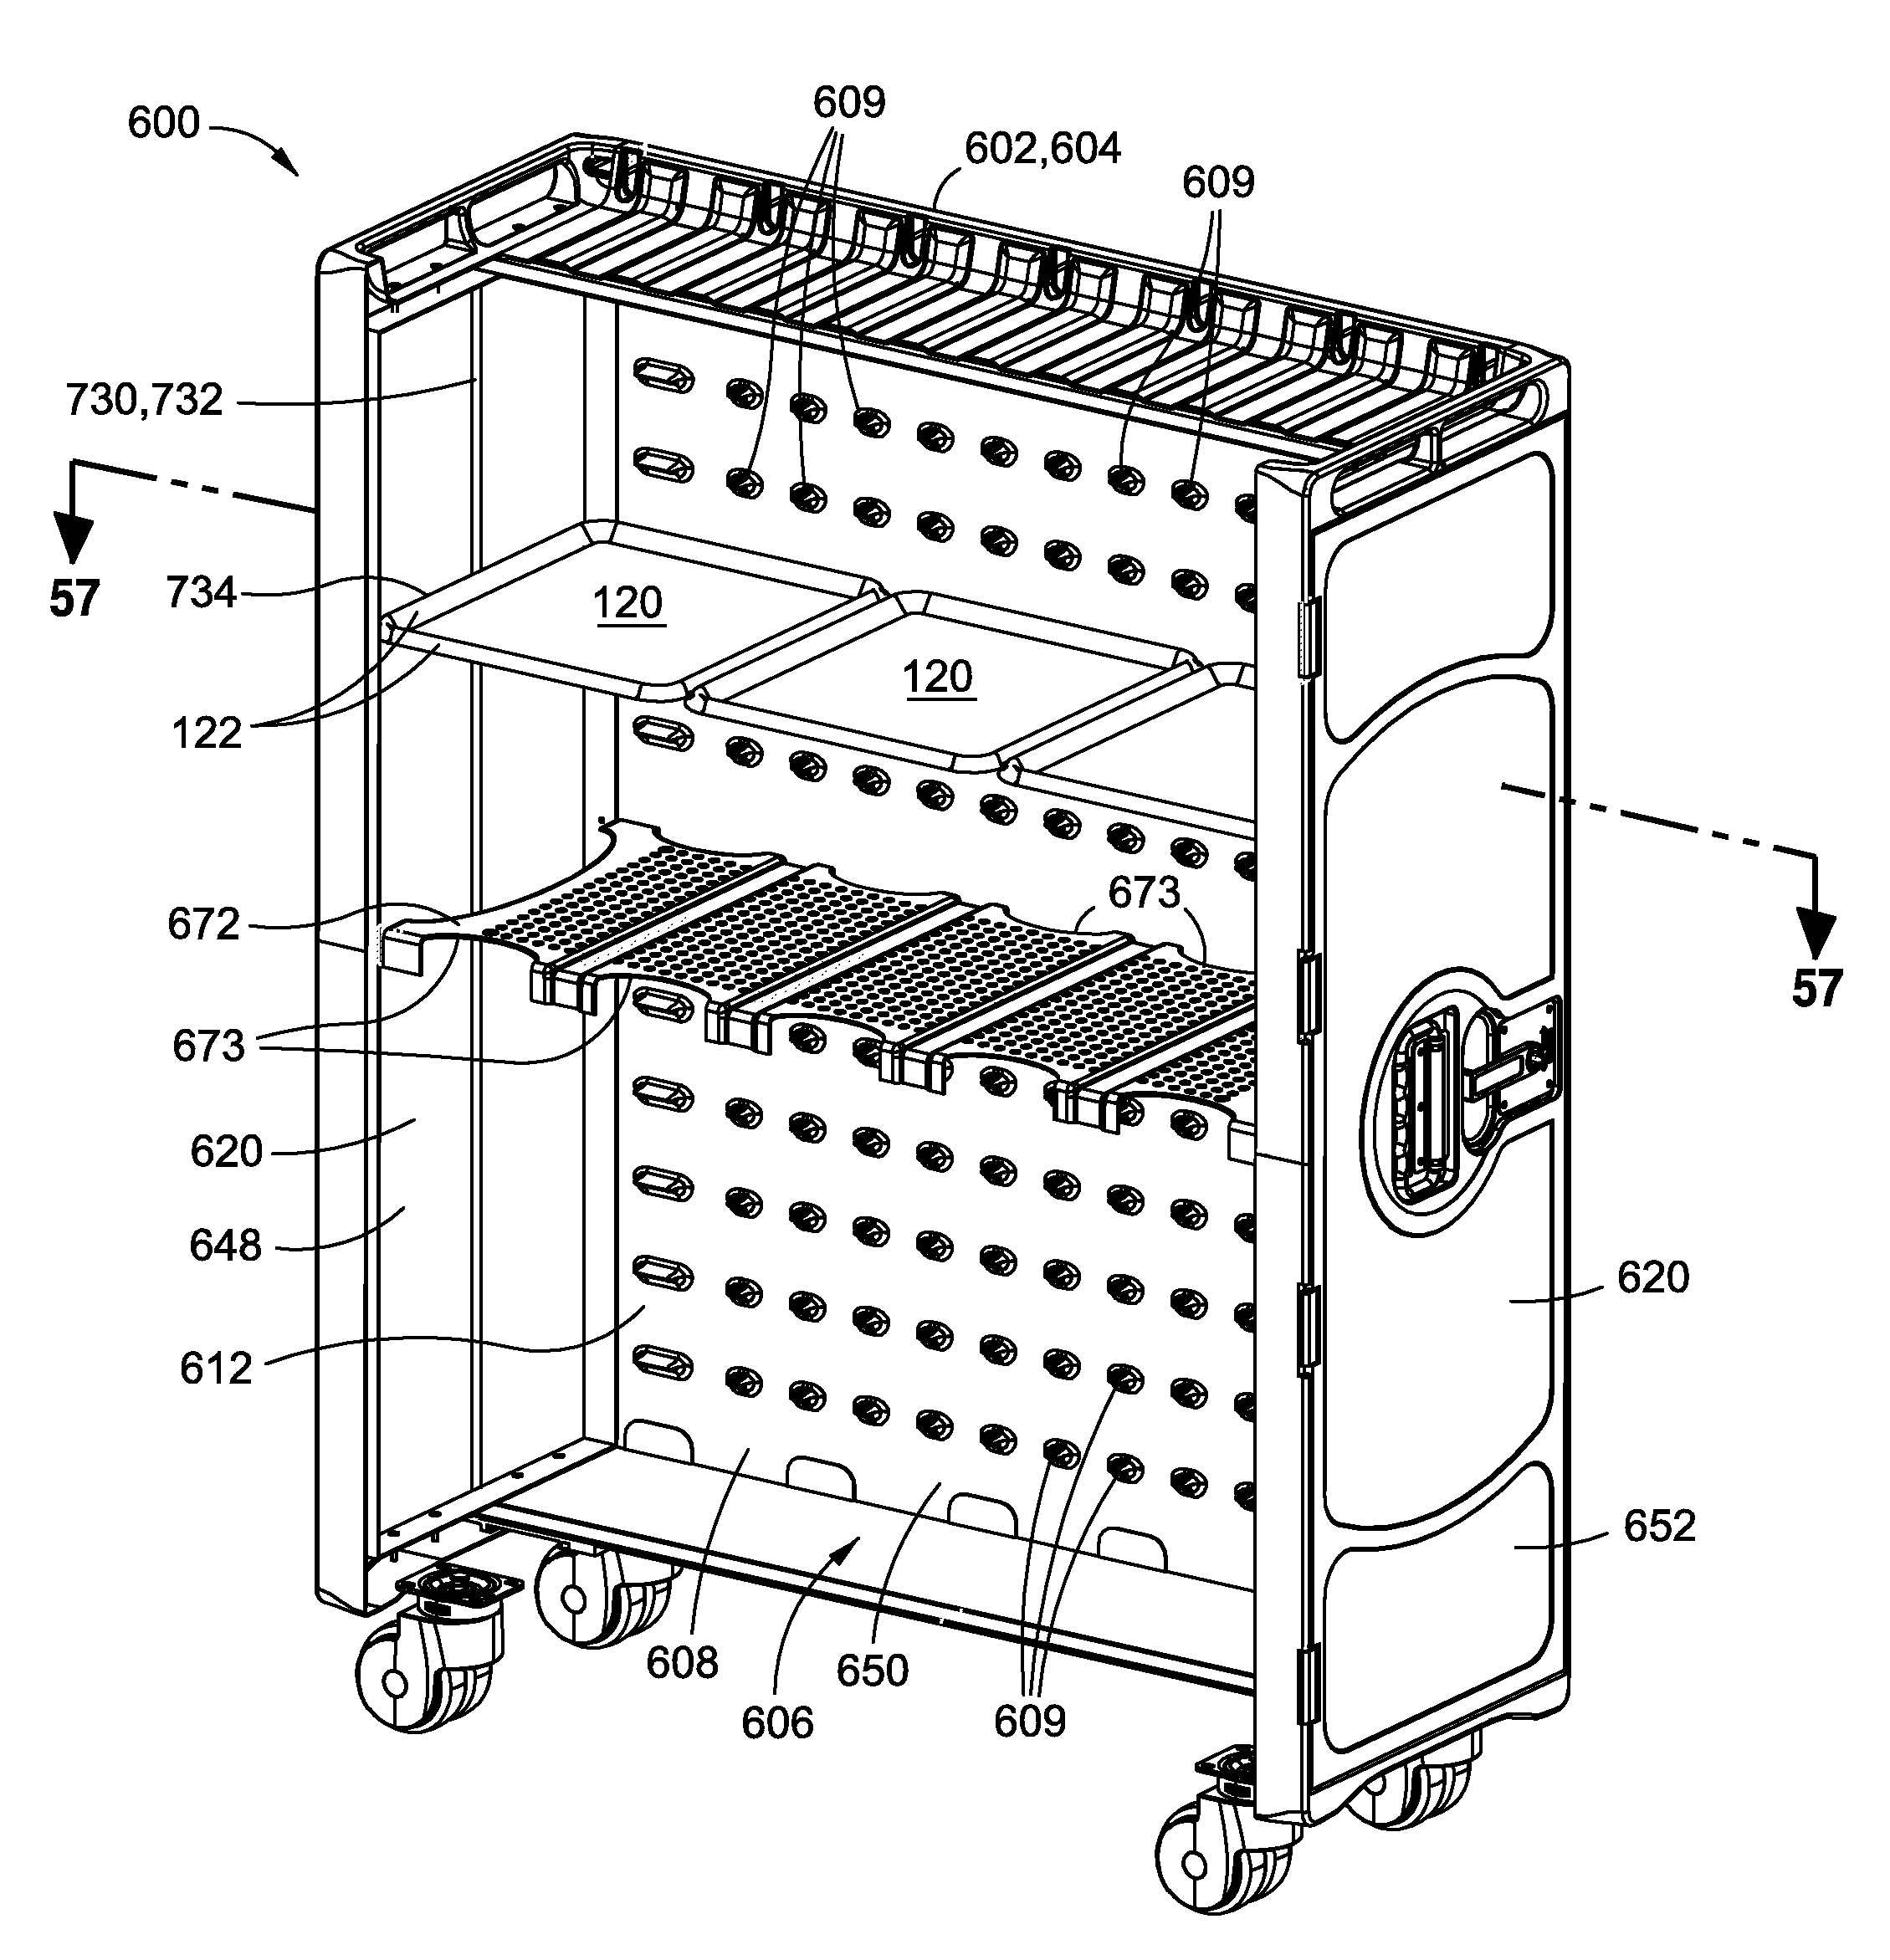 Passively cooled container system and method